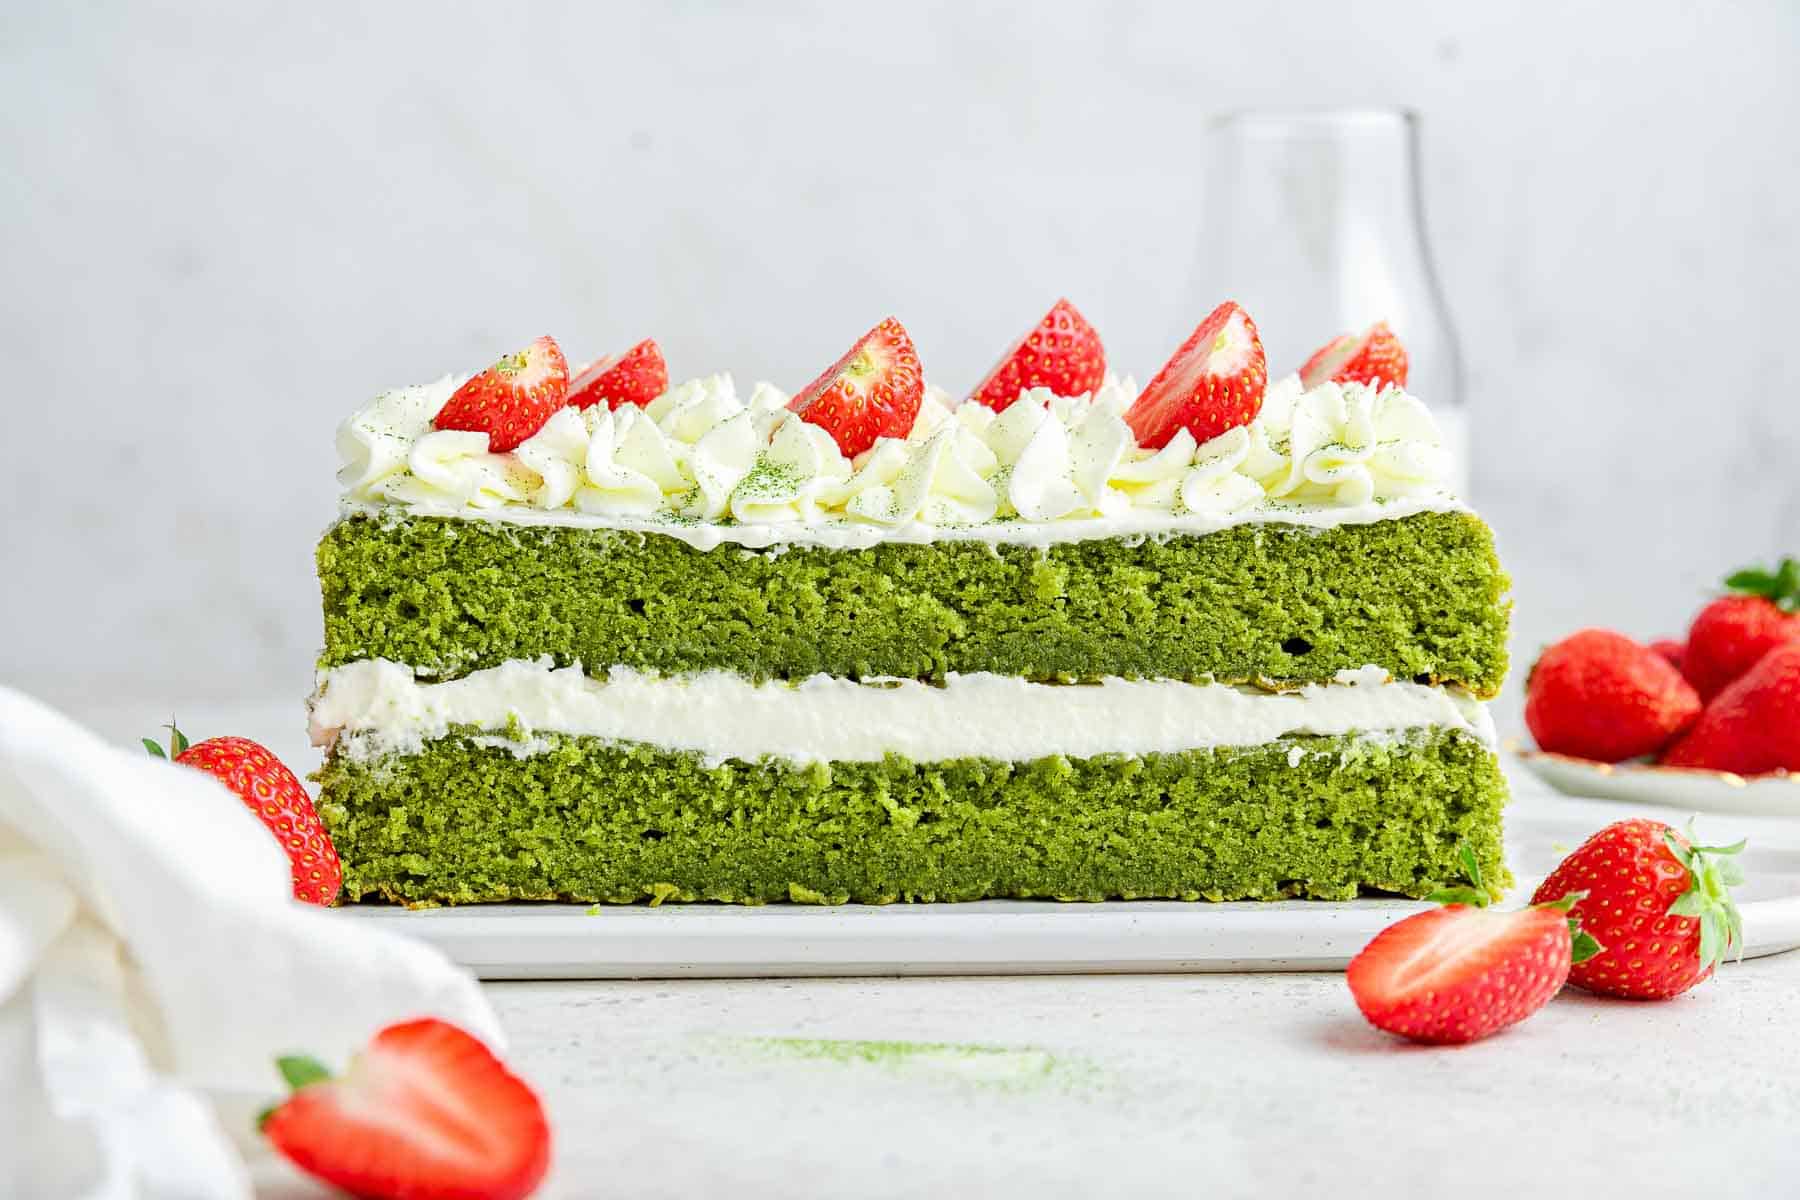 Side shot of a green layer cake made from a square pan.